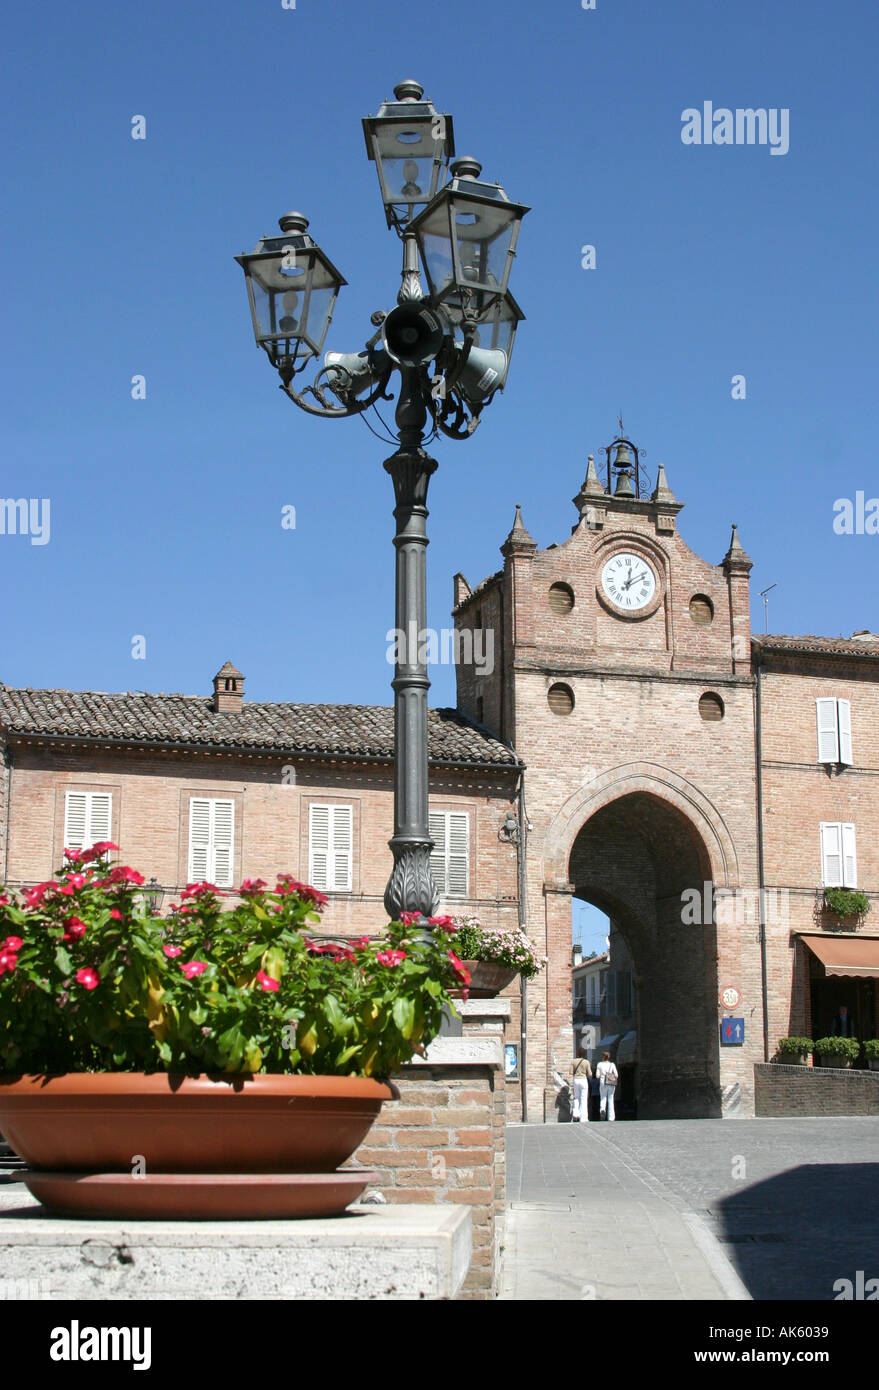 Town square of Amandola LeMarche Italy showing the historical arc into the towns square/piazza,Italy Stock Photo